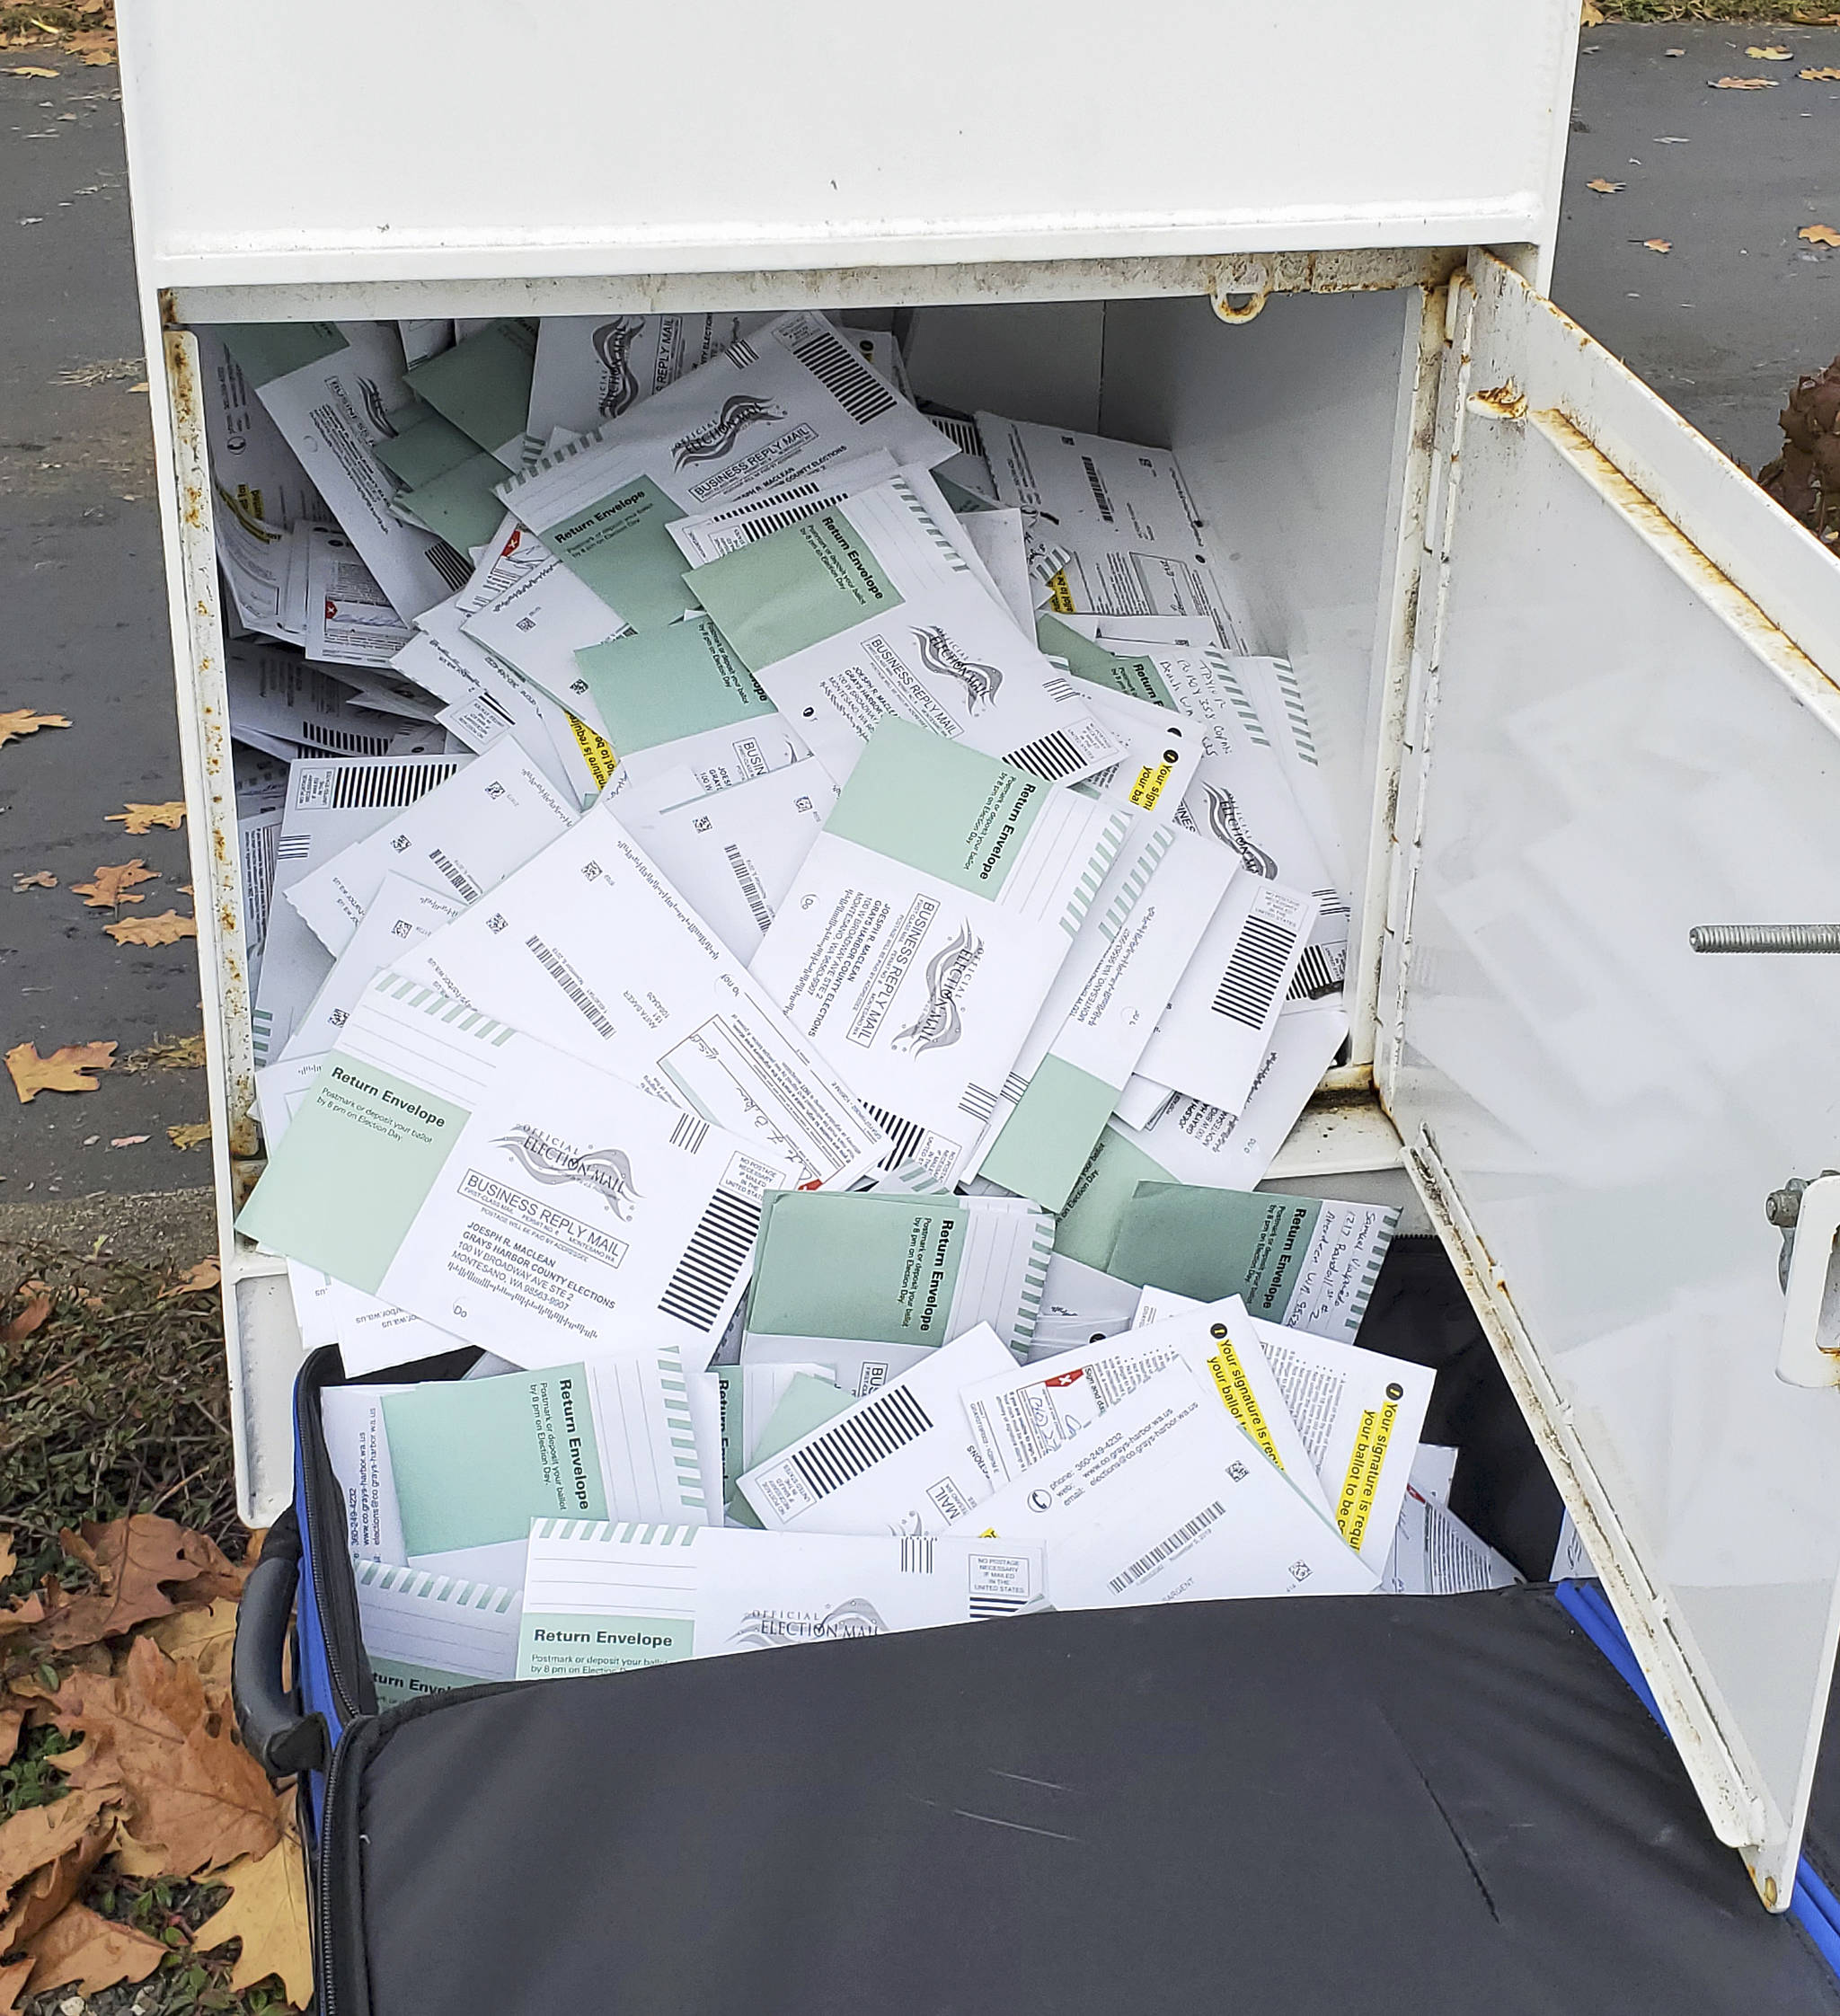 The ballot box in Hoquiam was so full Tuesday, Nov. 5, 2019, that the Auditor’s Office needed to make a special trip out to empty it. (Photo courtesy Joe MacLean, Grays Harbor County auditor)